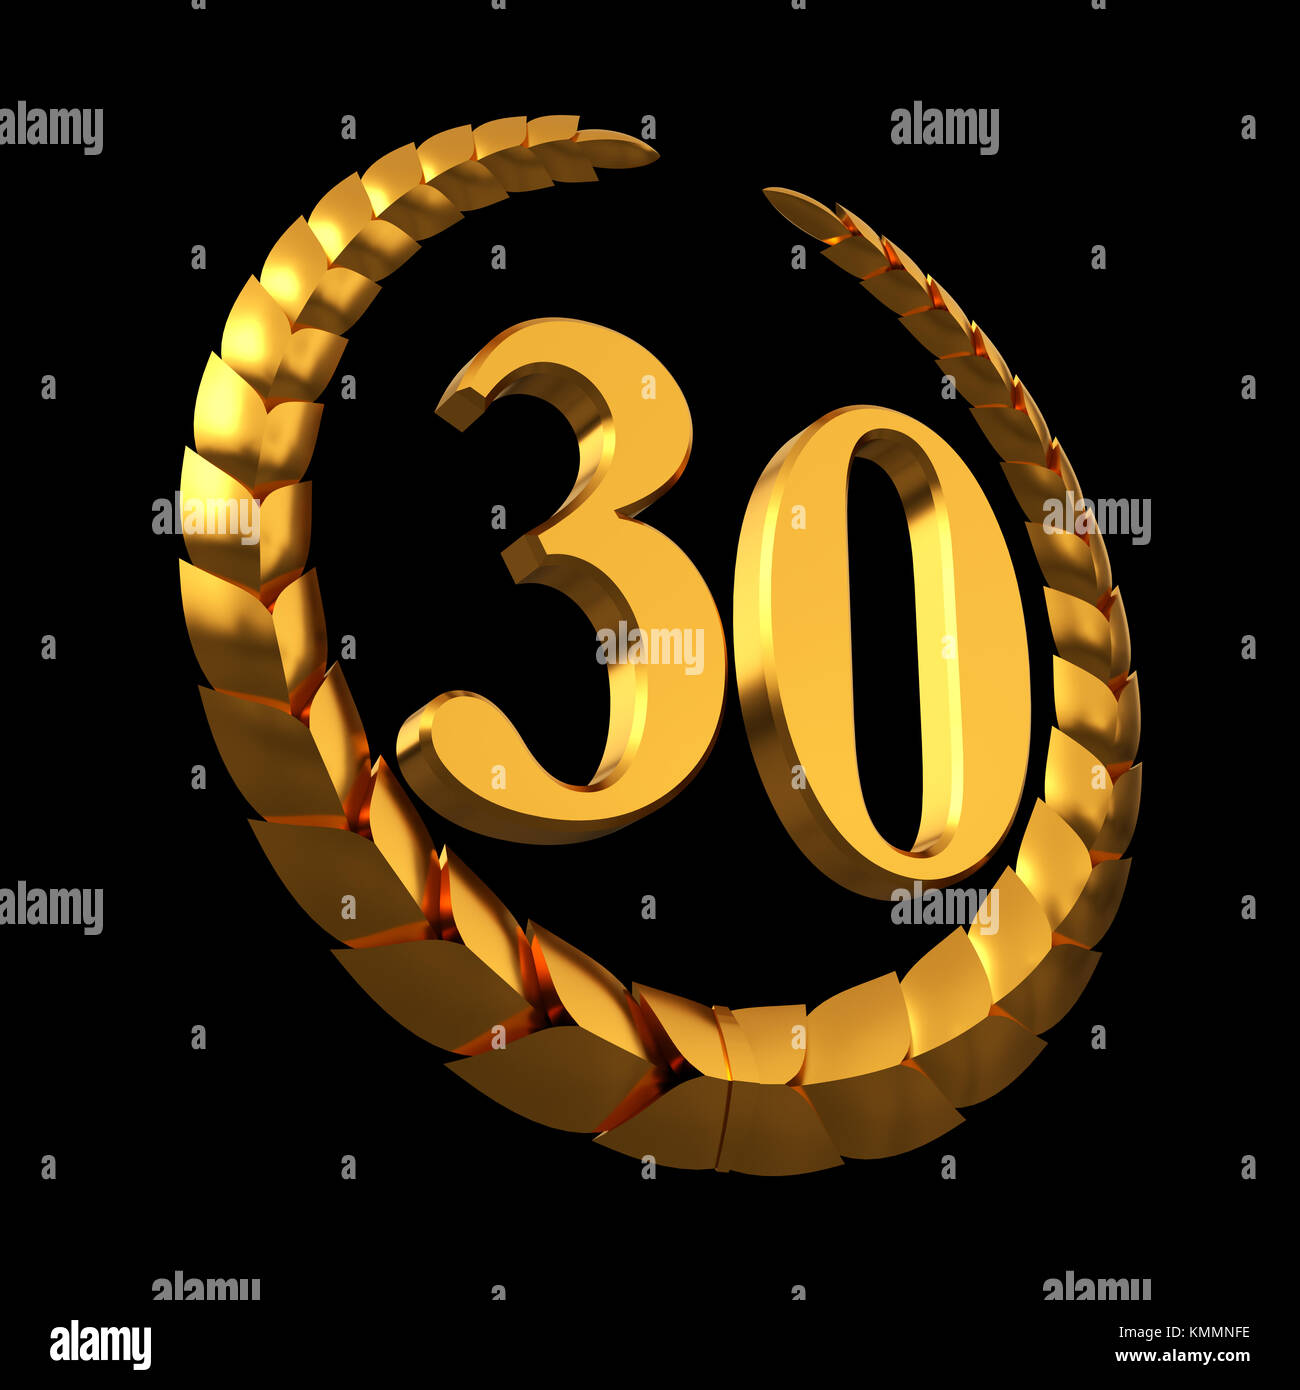 Anniversary Golden Laurel Wreath And Numeral 30 On Black Background Stock Photo